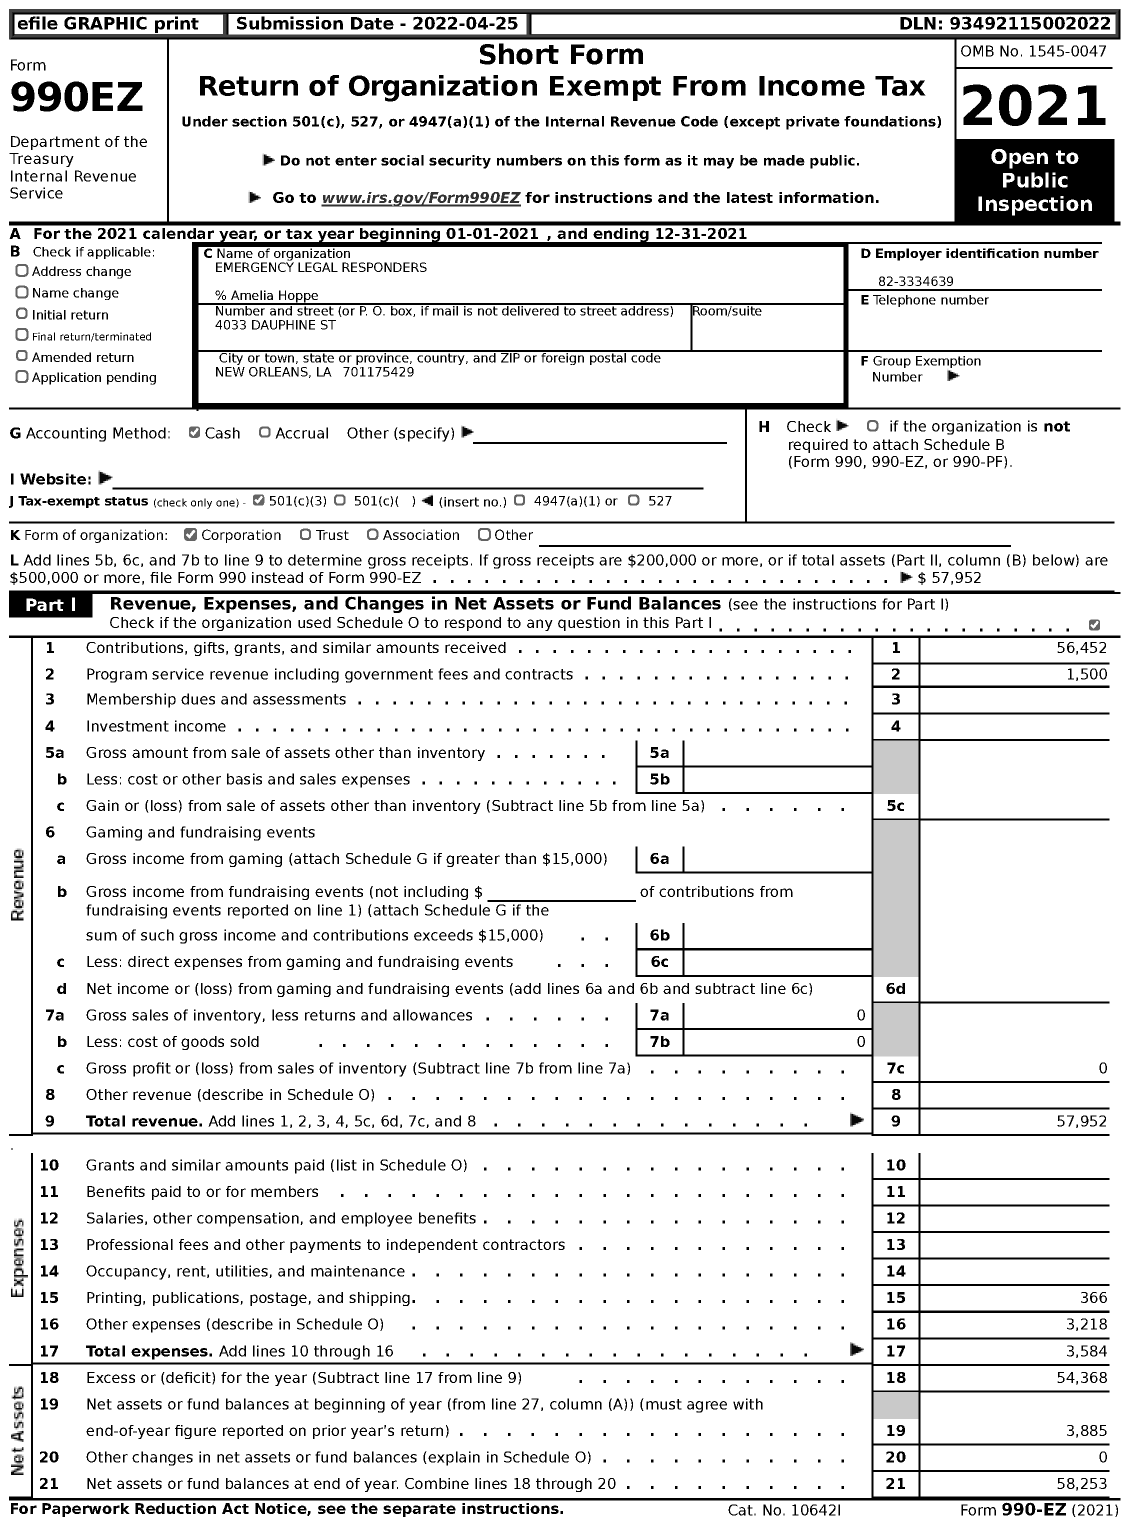 Image of first page of 2021 Form 990EZ for Emergency Legal Responders